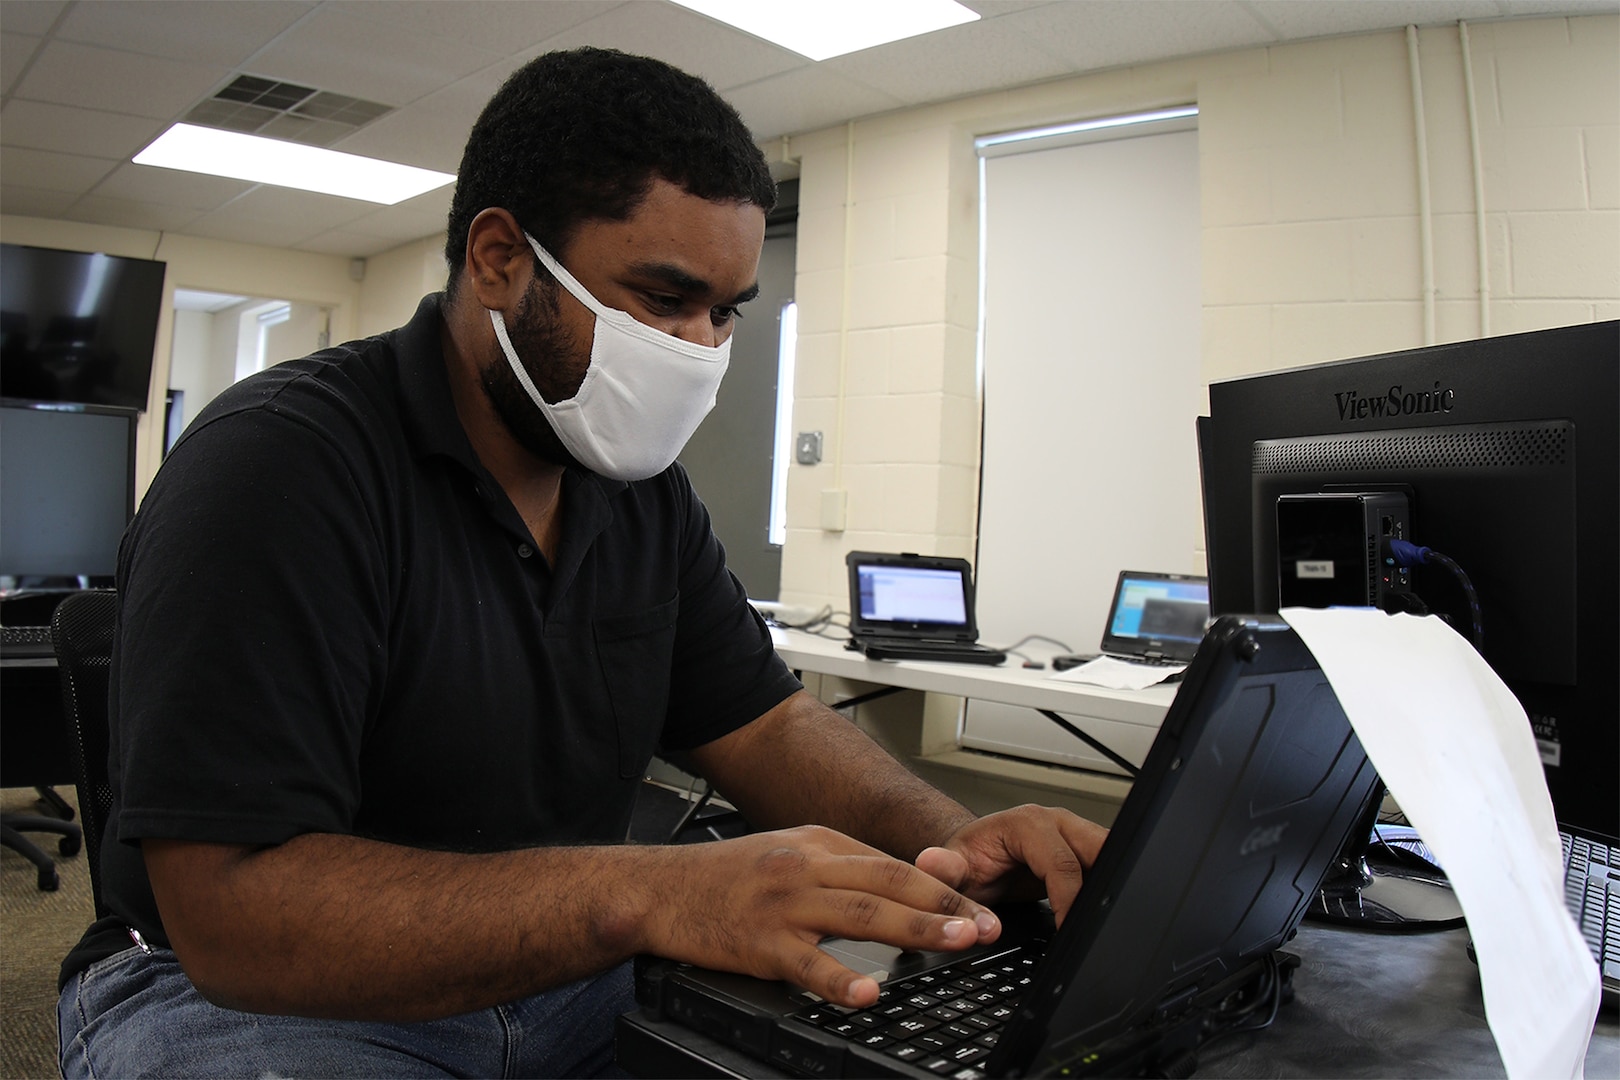 Spc. Carlos Cirano, a security analyst assigned to the North Carolina National Guard Cyber Security Response Force (CSRF), conducts cyber operations at a city of Roxboro facility in Roxboro, North Carolina, June 18, 2020.  The CSRF helped restore city and county computer networks after a cyberattack in late May.